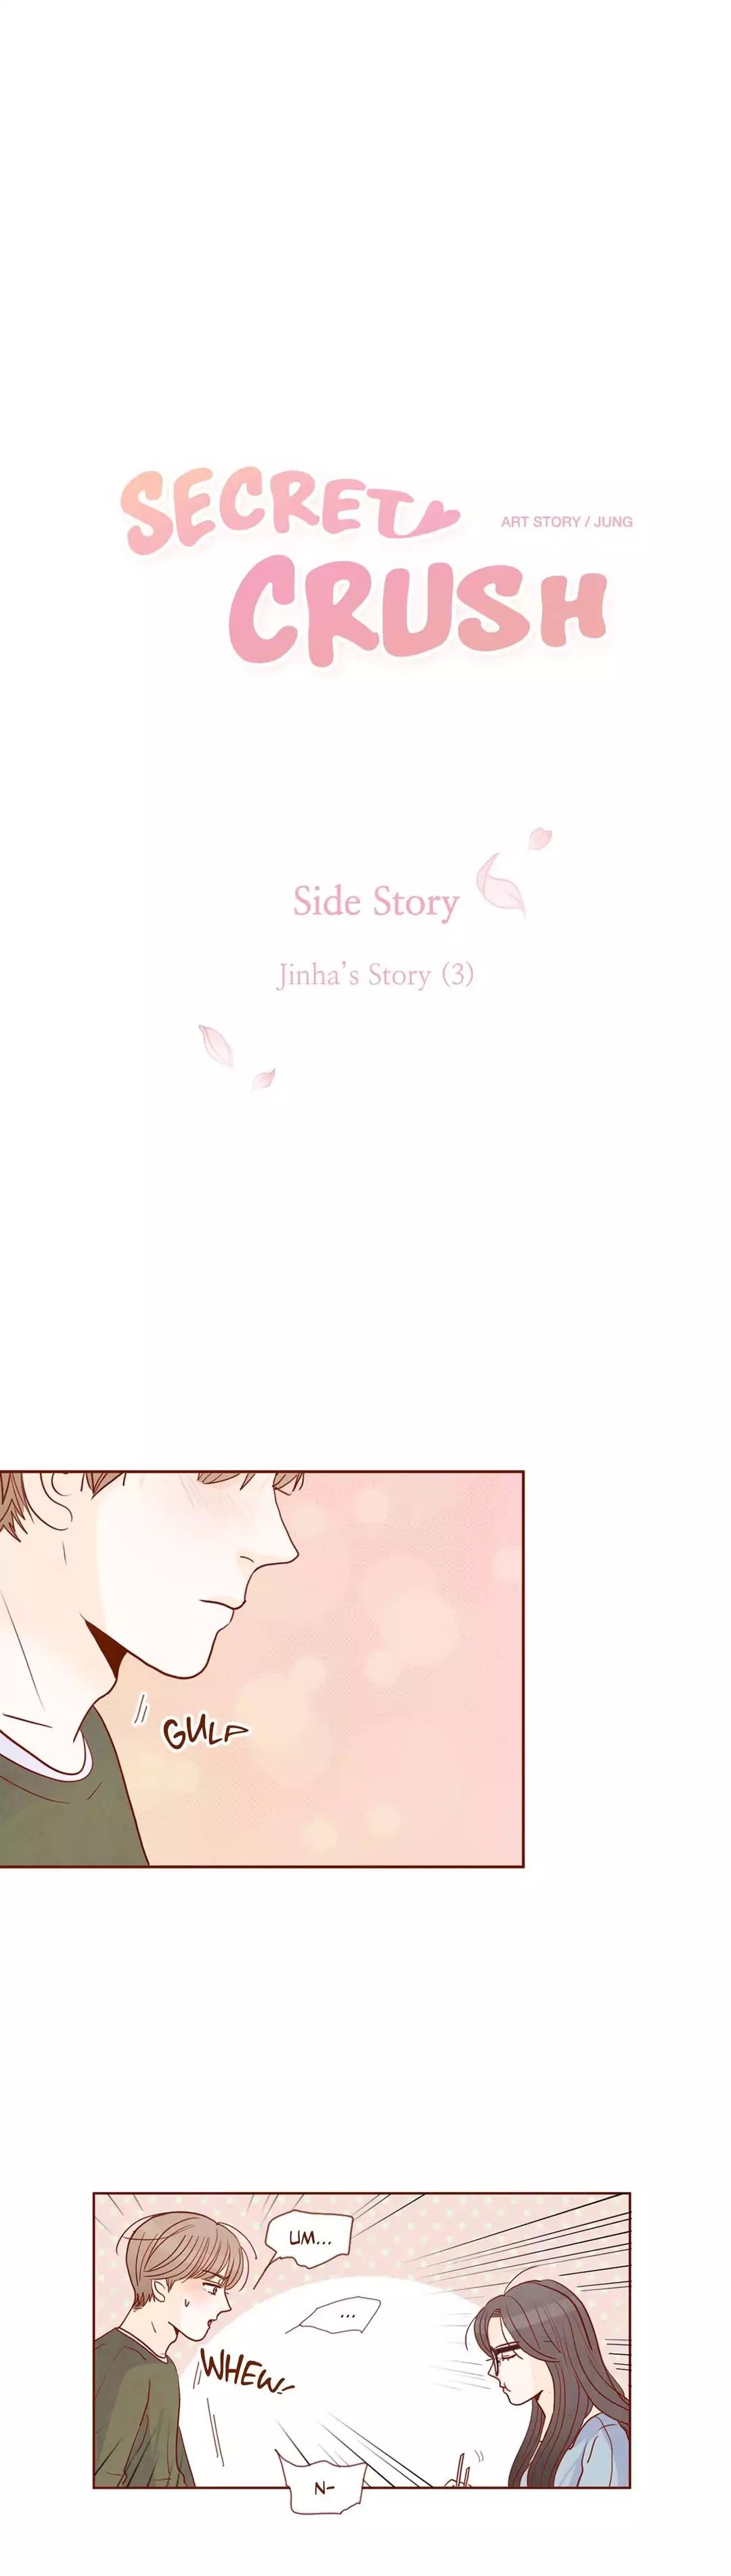 Secret Crush Side Story: Jinha's Story (3) - Picture 1